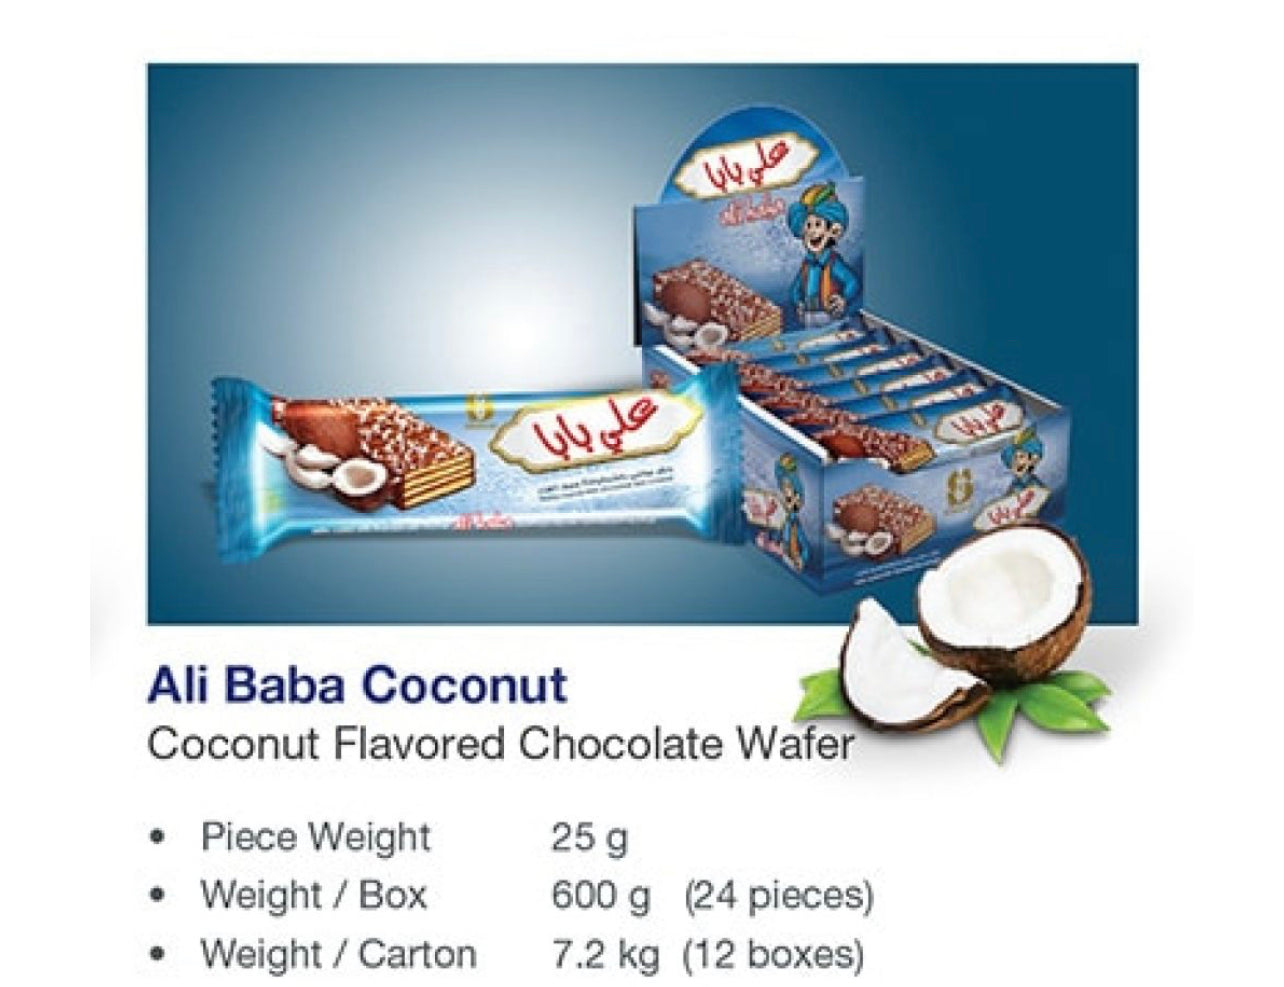 Ali Baba Wafer Coated With Chocolate and Coconut 24 pcs 600gr